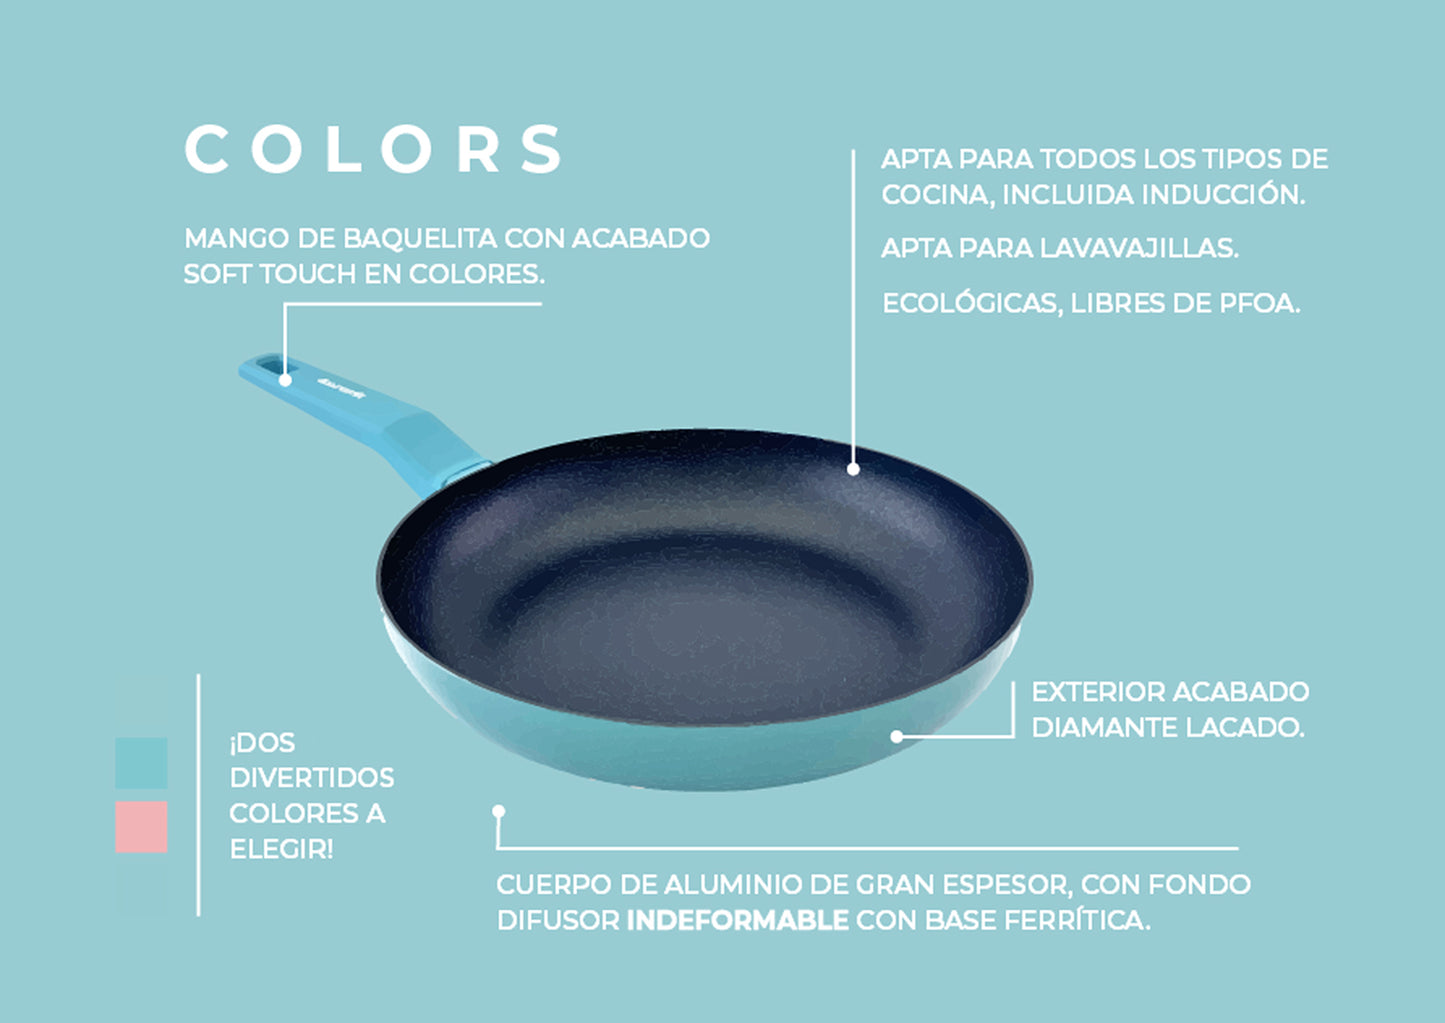 Sky blue COLORS frying pan, suitable for all types of cookers, including induction 